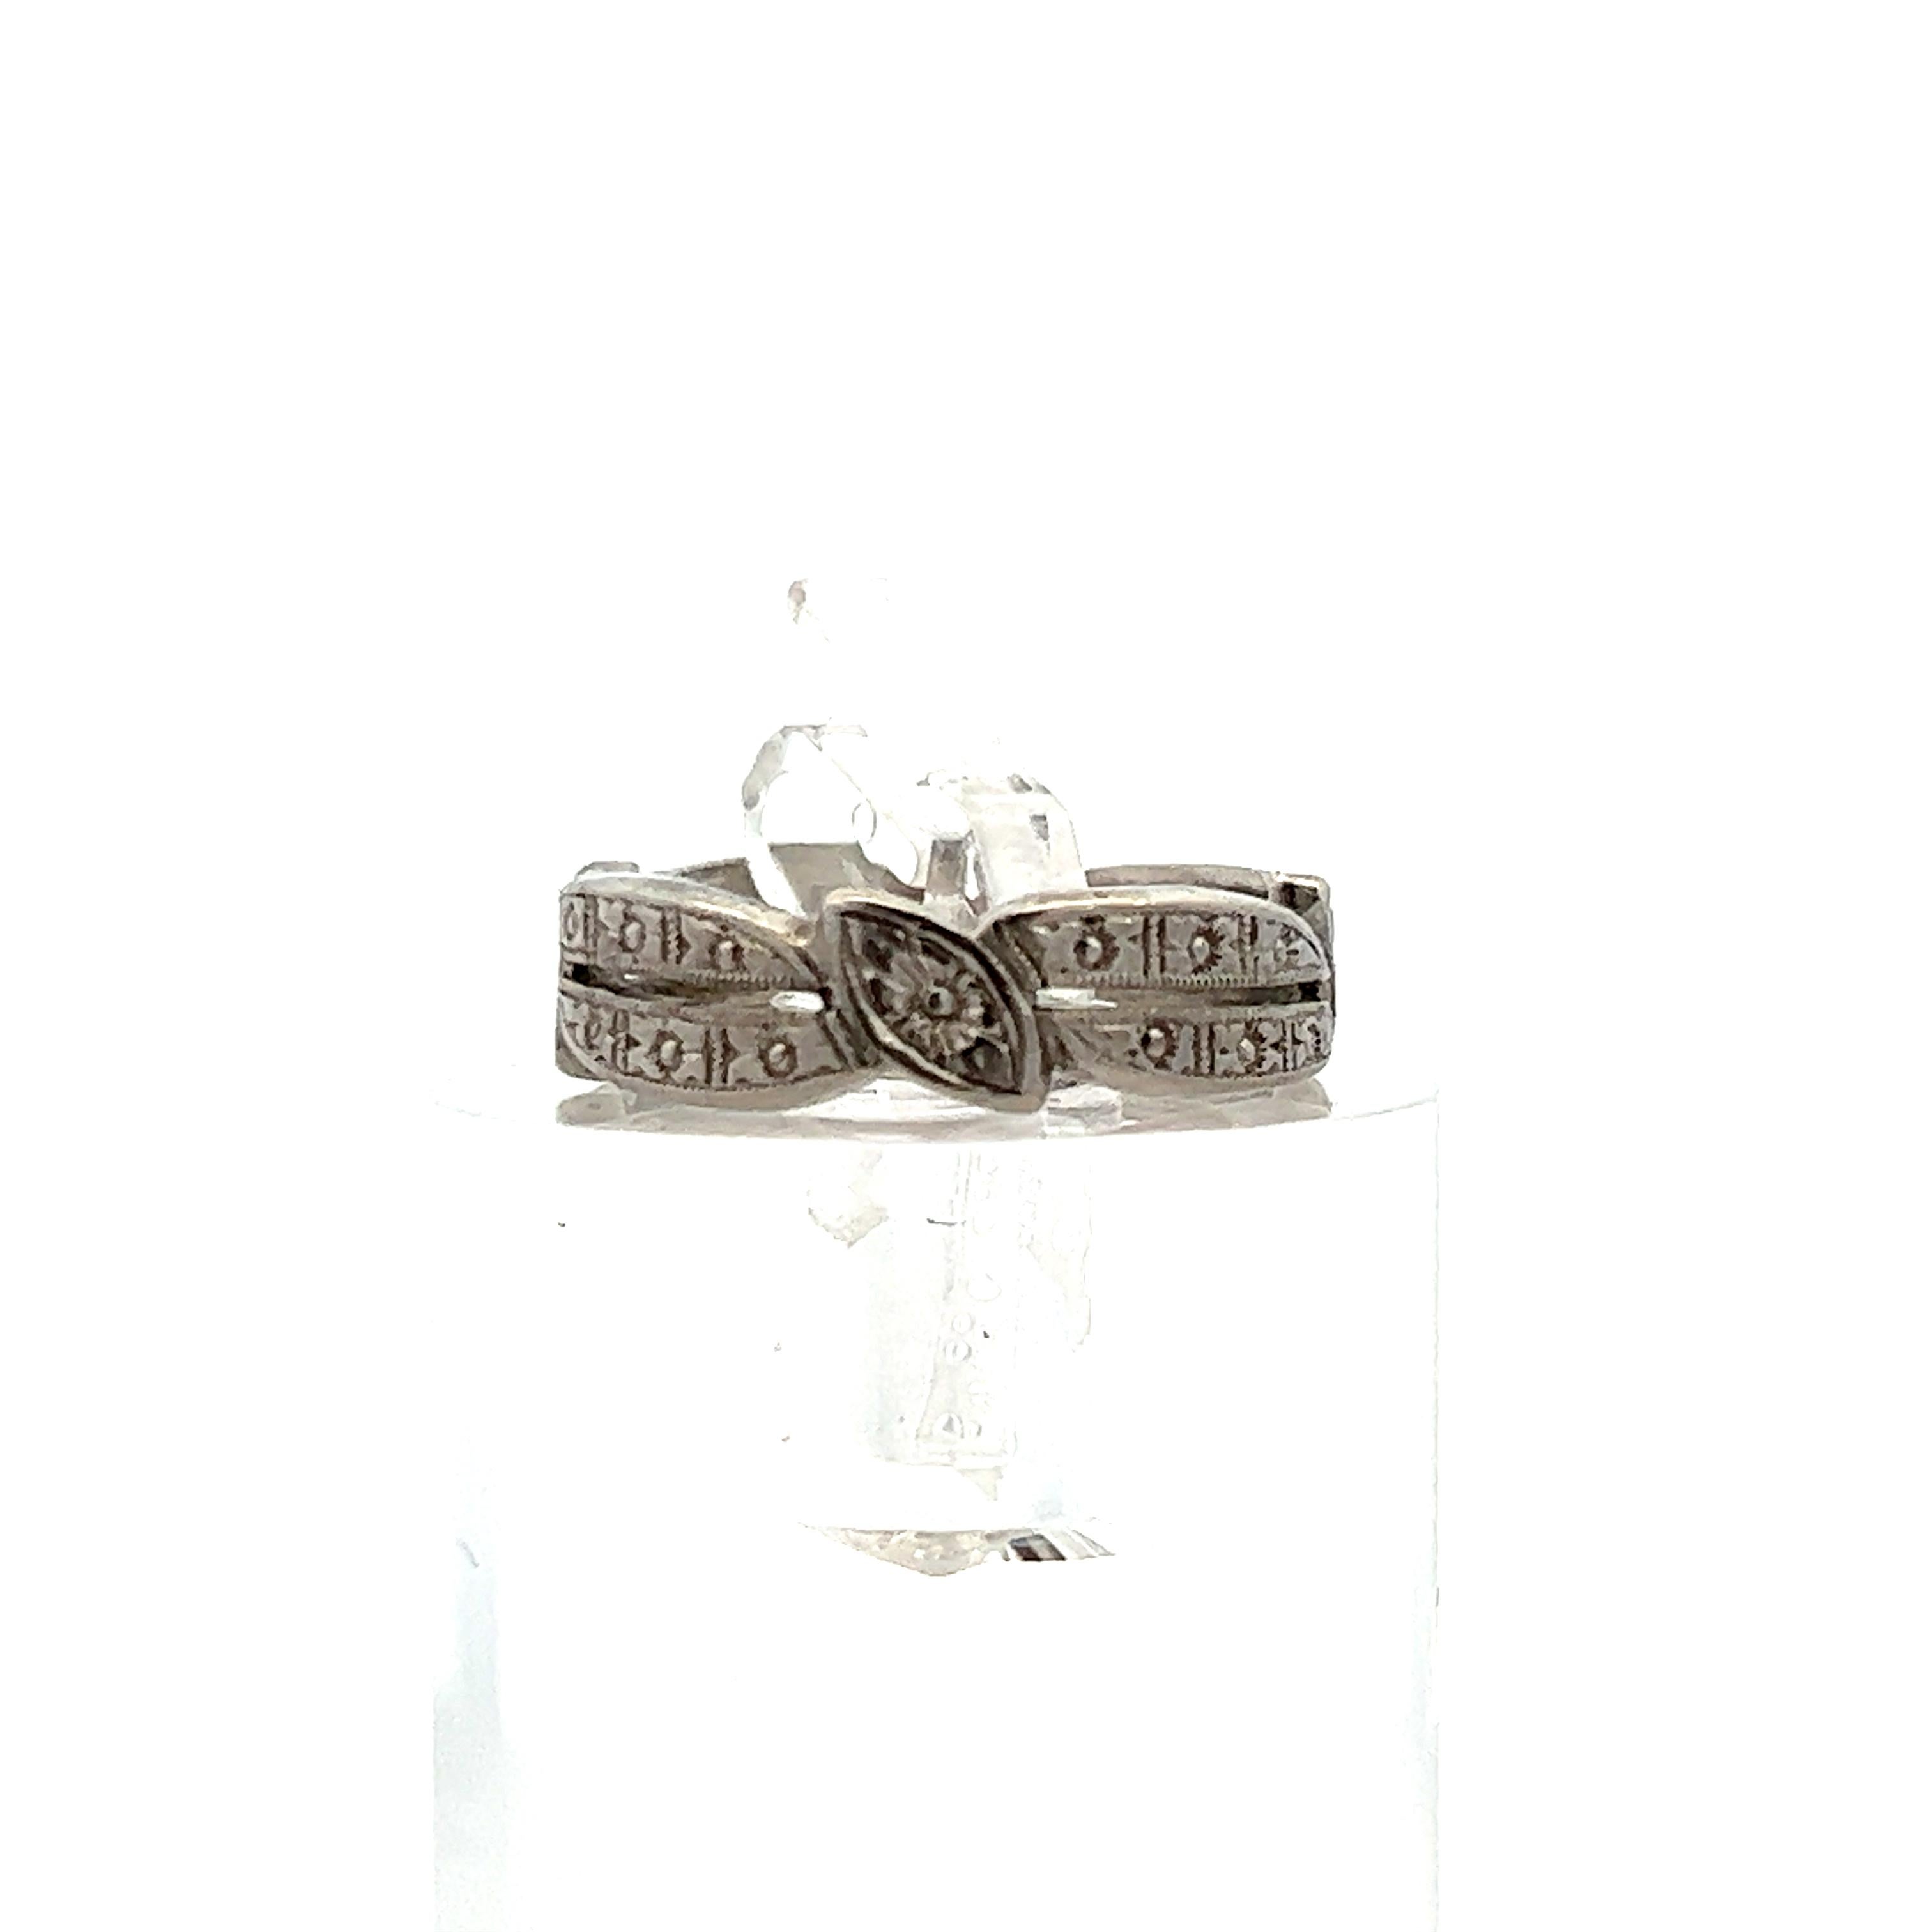 This timeless treasure from the 1925 Art Deco period is an engraved band made from platinum. The band consist of 2 individual converging bands that are connected with oval shaped breaks. The individual bands as well as oval shaped breaks all contain